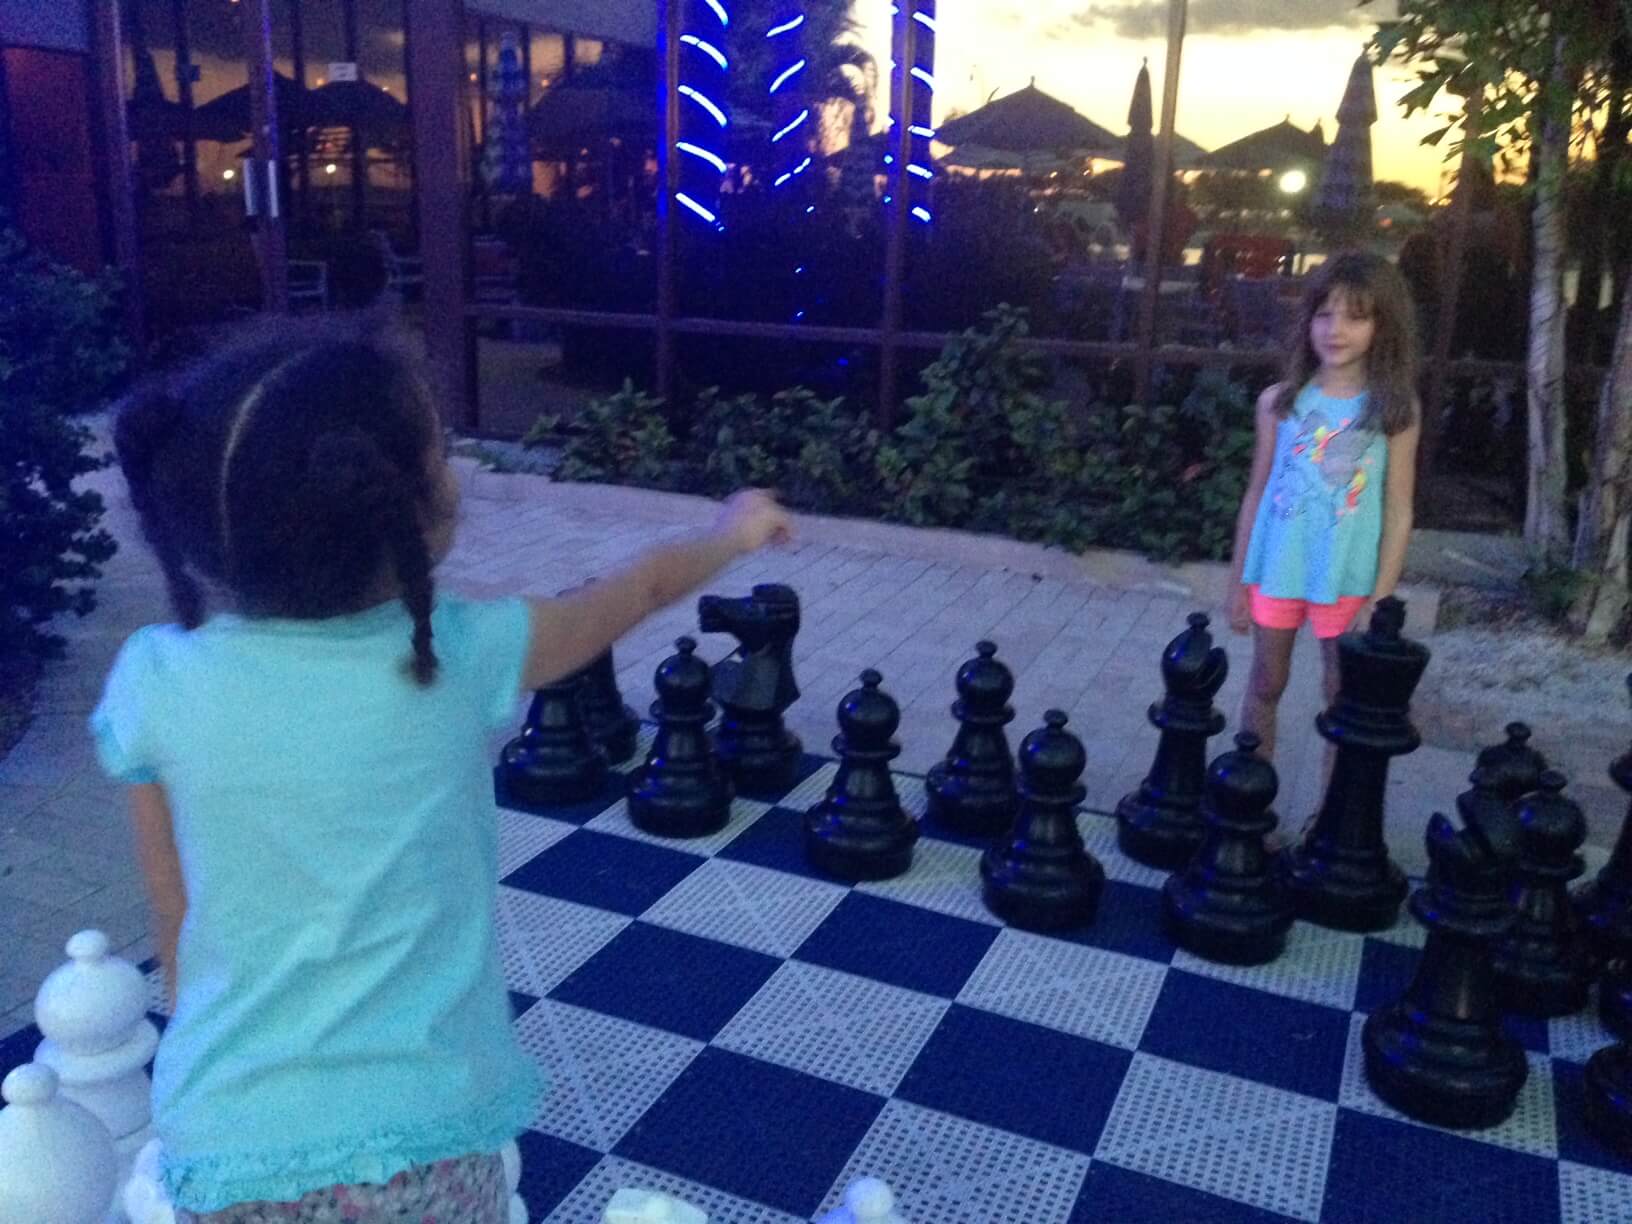 A giant game of chess for the kids to play at the Bay Harbor Hotel in Tampa, Florida.